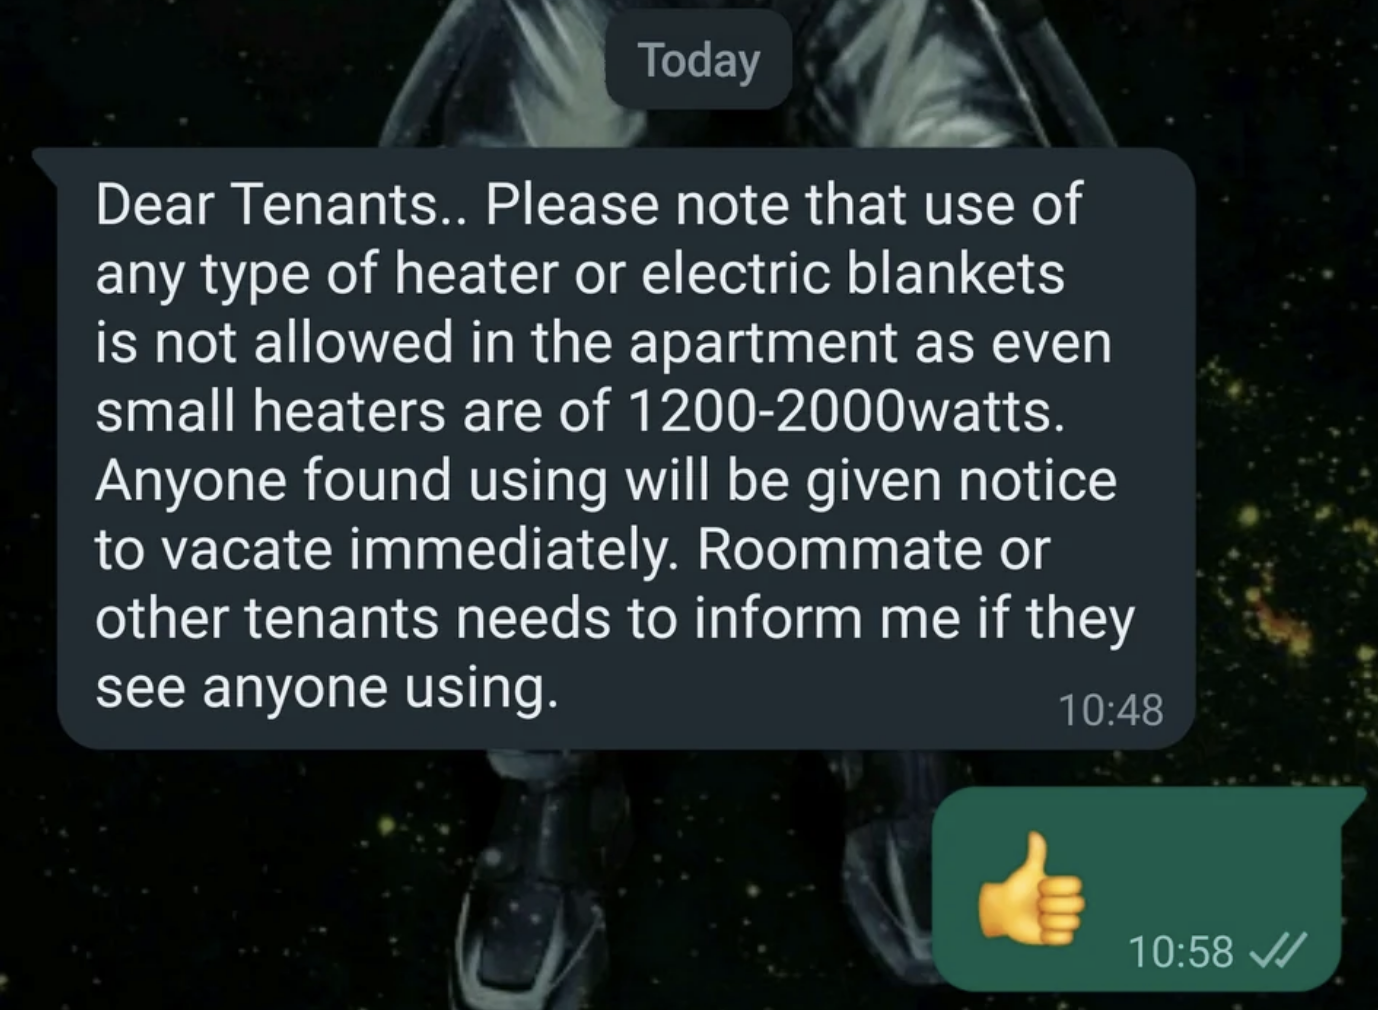 dear tenants anyone found using electric blankets will be given notice to vacate immediately